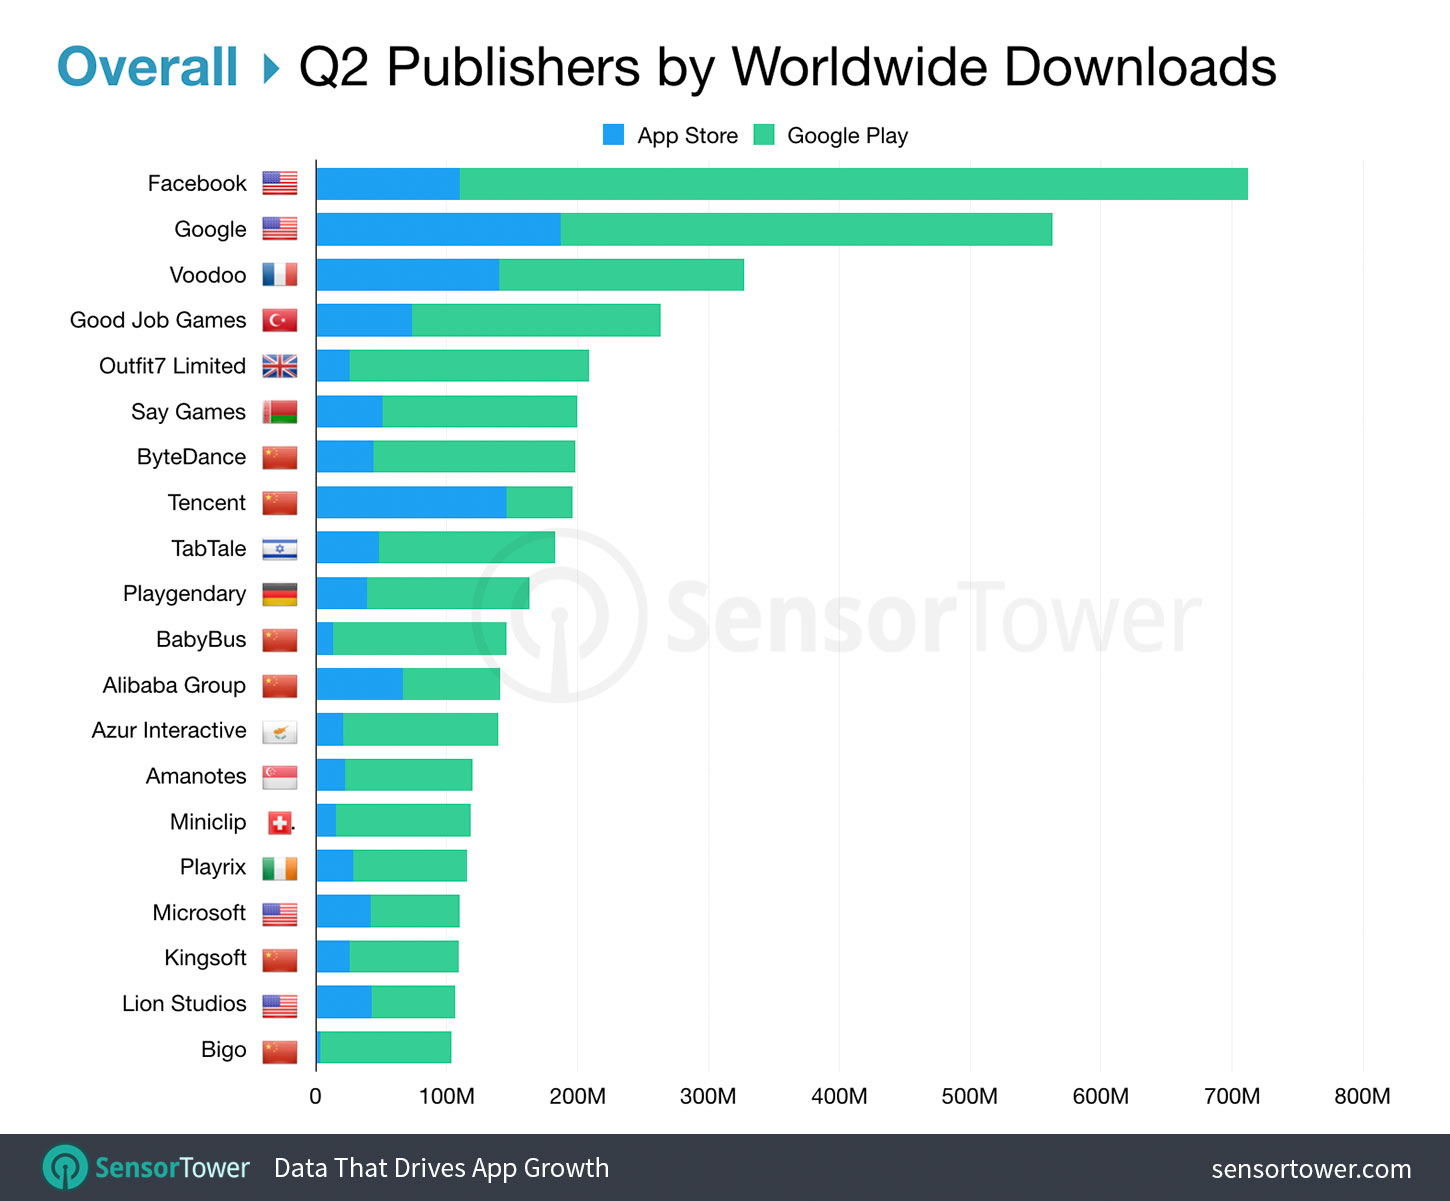 Top Publishers Worldwide Overall for Q2 2019